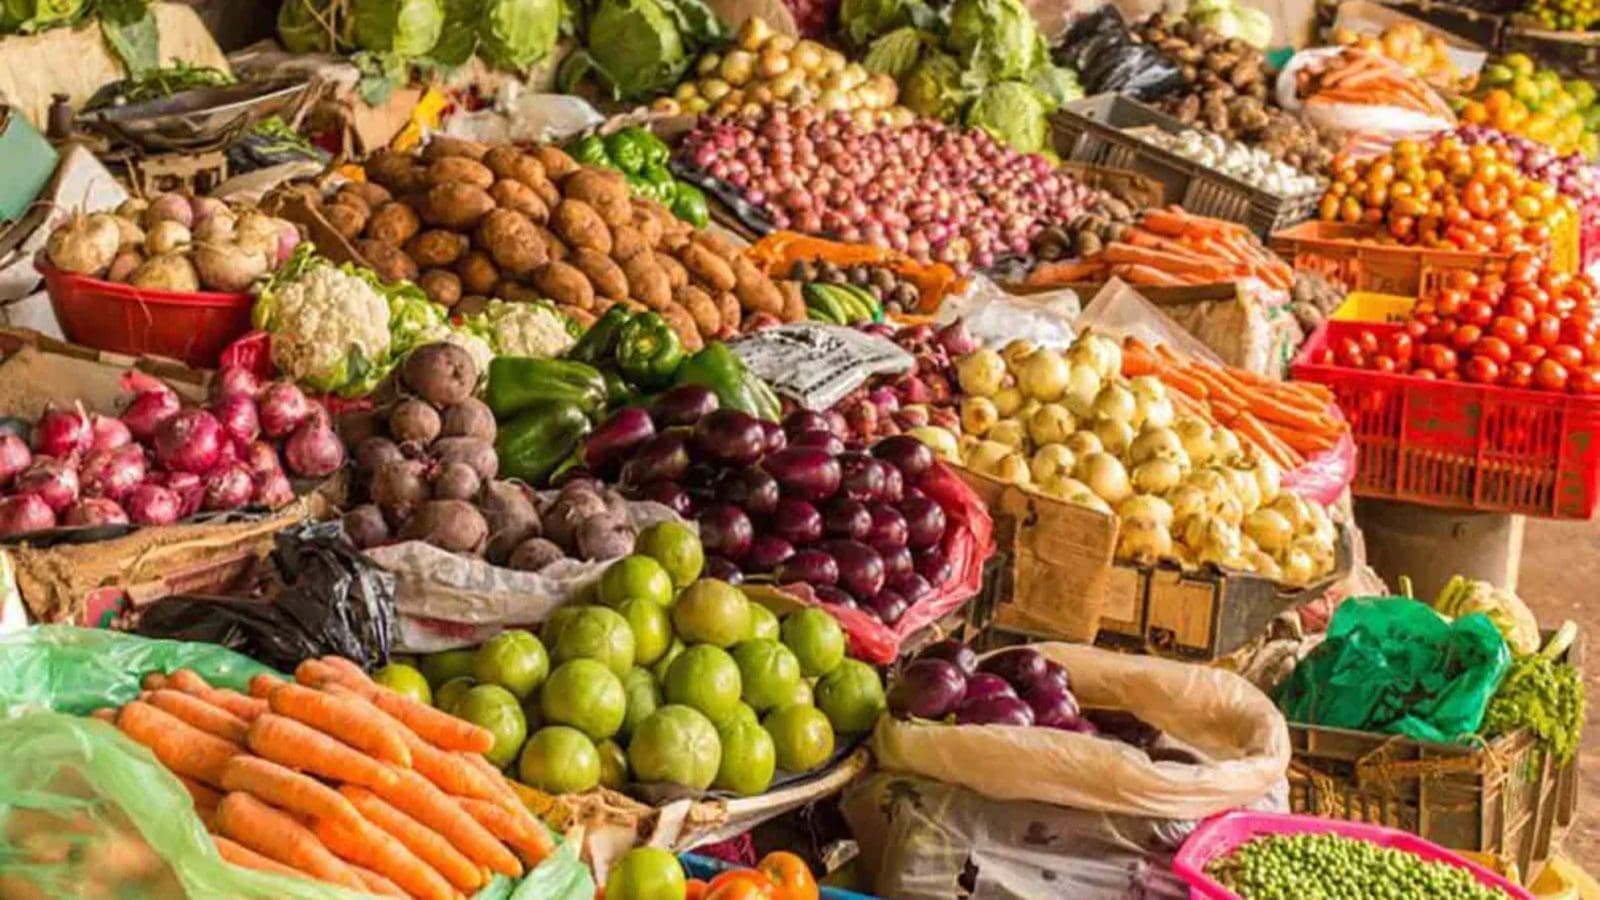 Food inflation in Togo cools driven by 5.3% price decline in food and non-alcoholic beverage